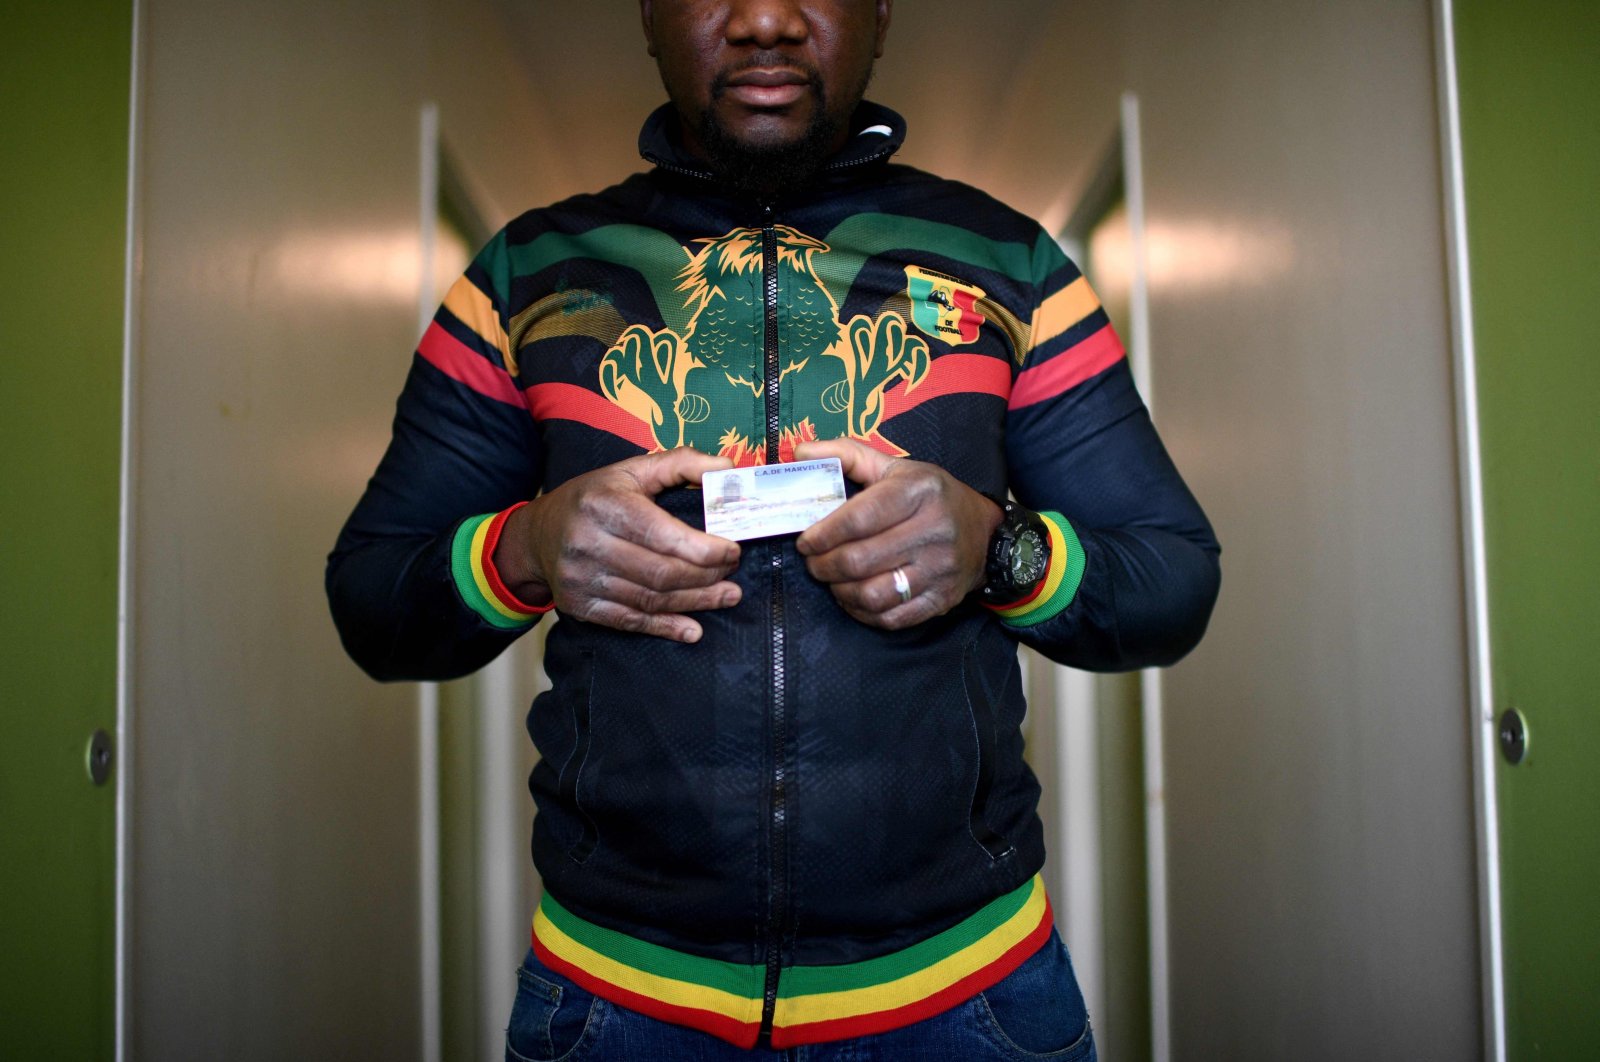 An undocumented worker from Mali holds his access card to the construction site where he used to work illegally, the Marville Aquatics Centre in nearby La Courneuve, which will serve as a training base for the Paris 2024 Olympic Games, Aubervilliers, northern Paris, France, Dec. 15, 2022. (AFP Photo)